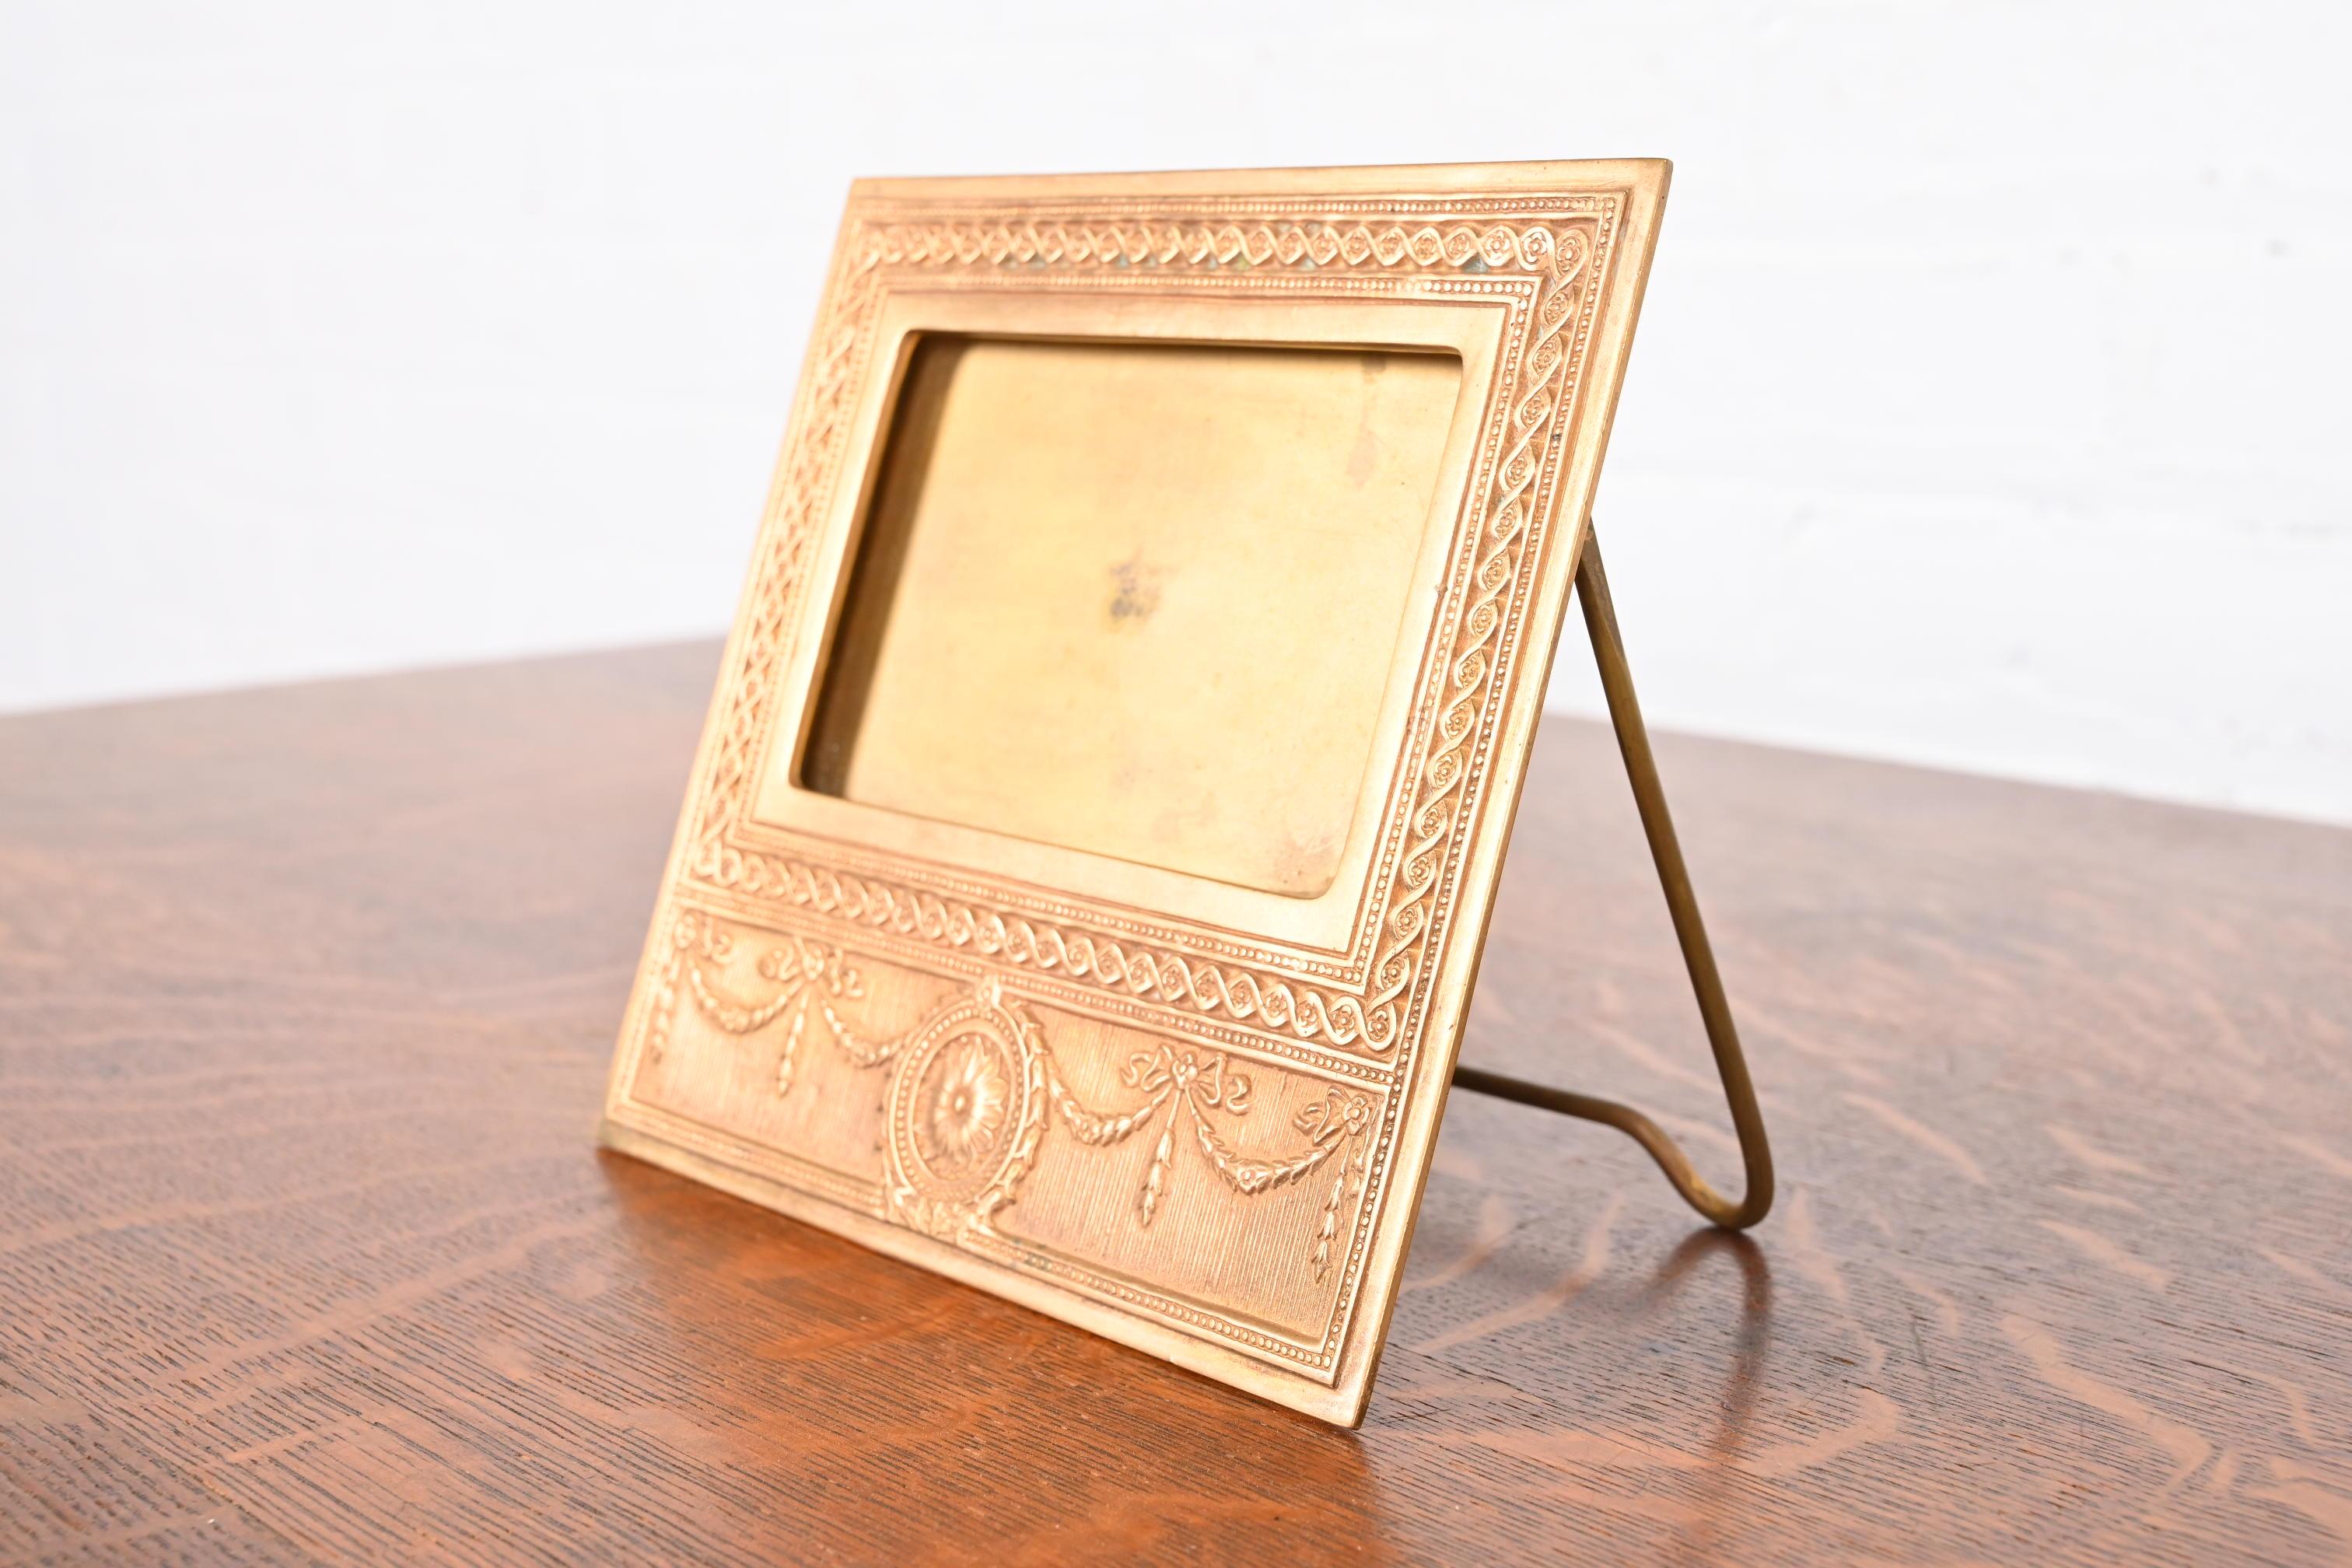 Tiffany Studios New York Adam Bronze Doré Desk Calendar Frame or Picture Frame In Good Condition For Sale In South Bend, IN